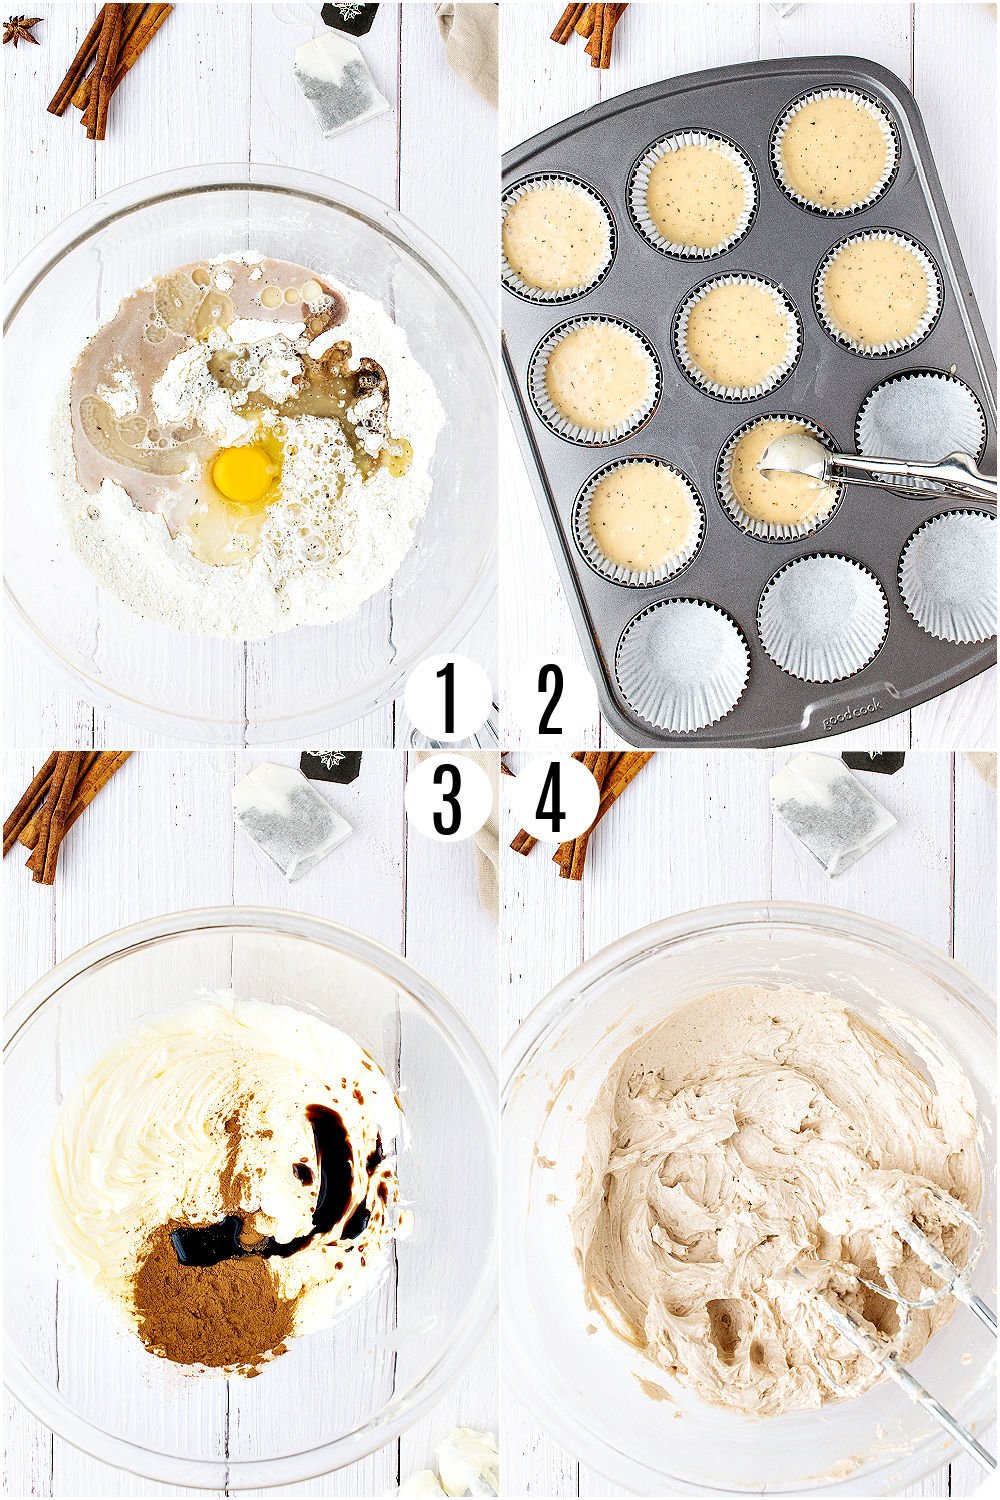 Step by step photos showing how to make chai cupcakes.